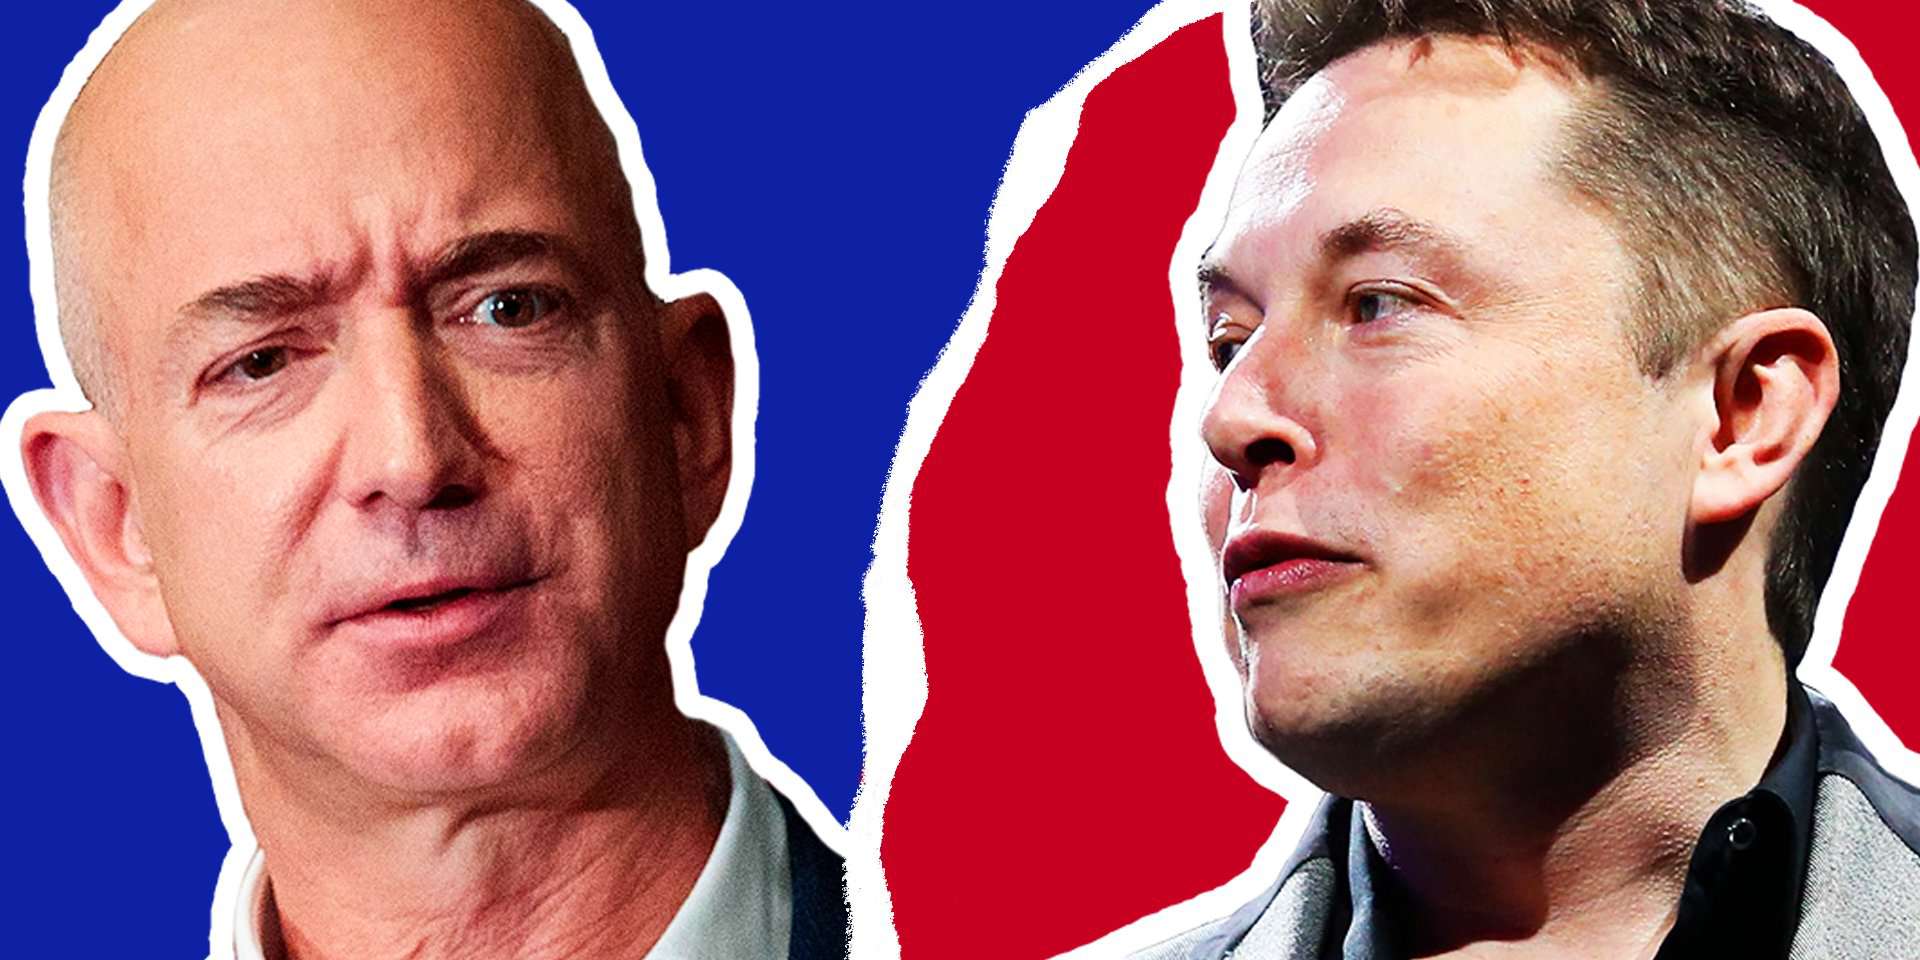 Taboola Ad Example 51430 - Why Elon Musk And Jeff Bezos Are In An Epic Feud That's Lasted Years